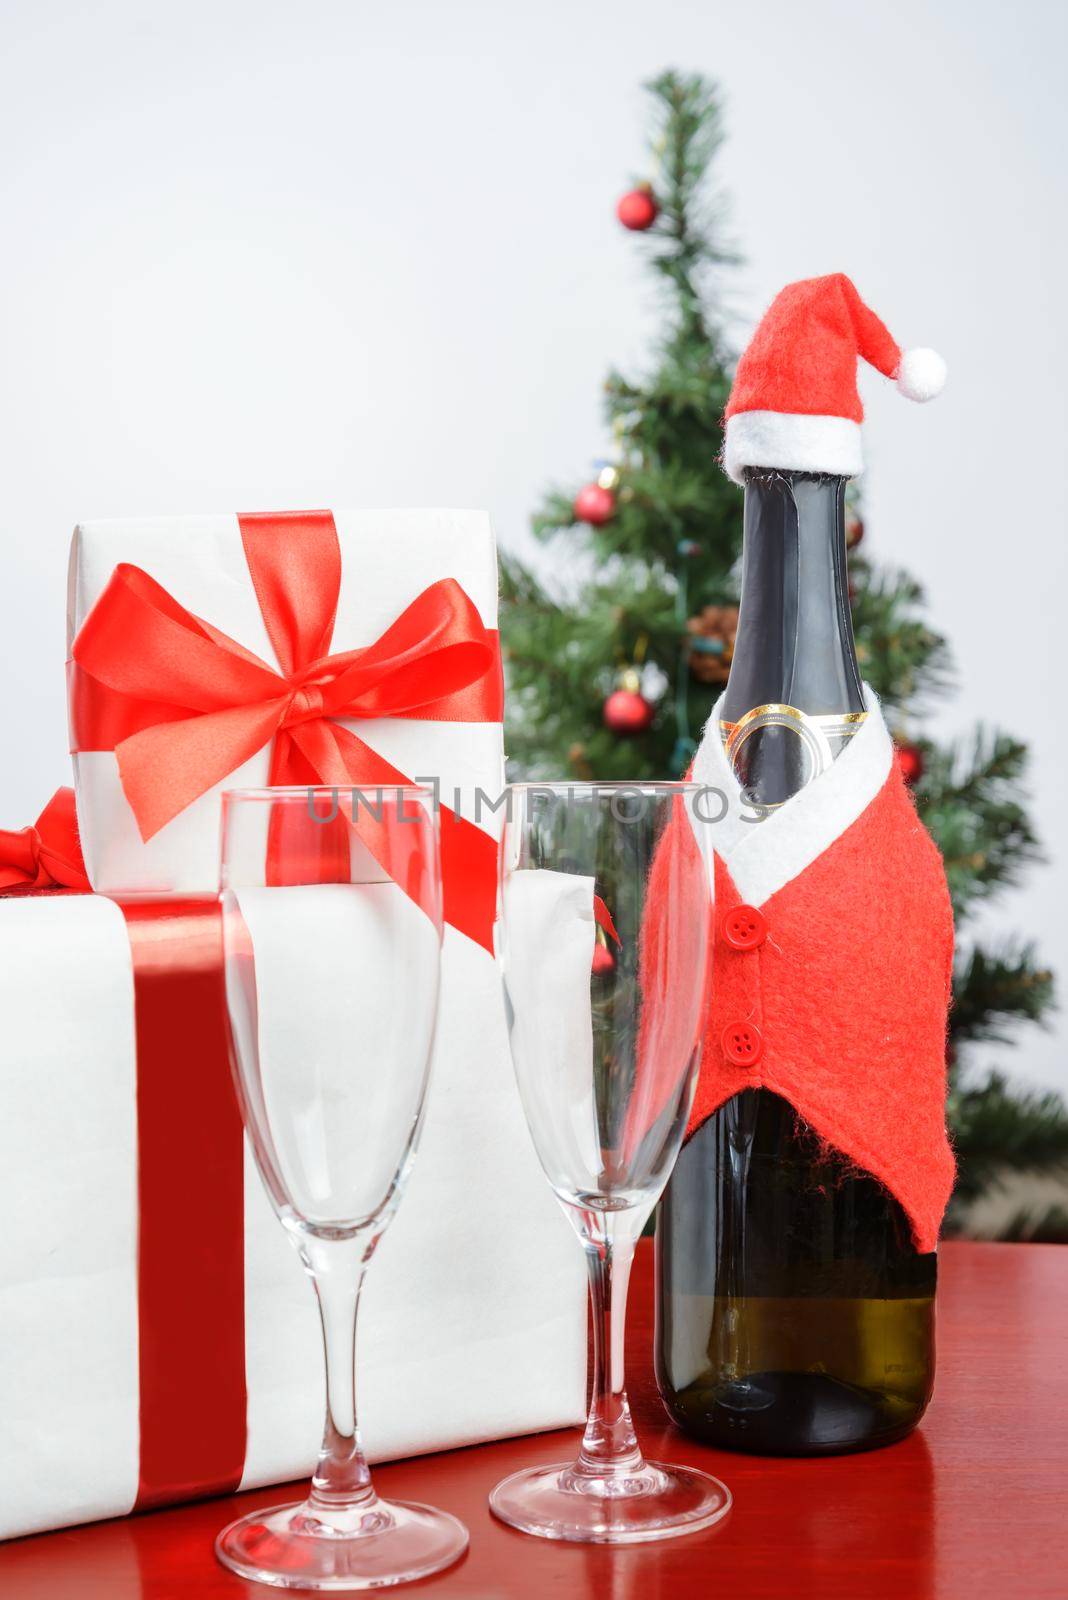 Present with red ribbon, a bottle of champagne on the background of Christmas tree